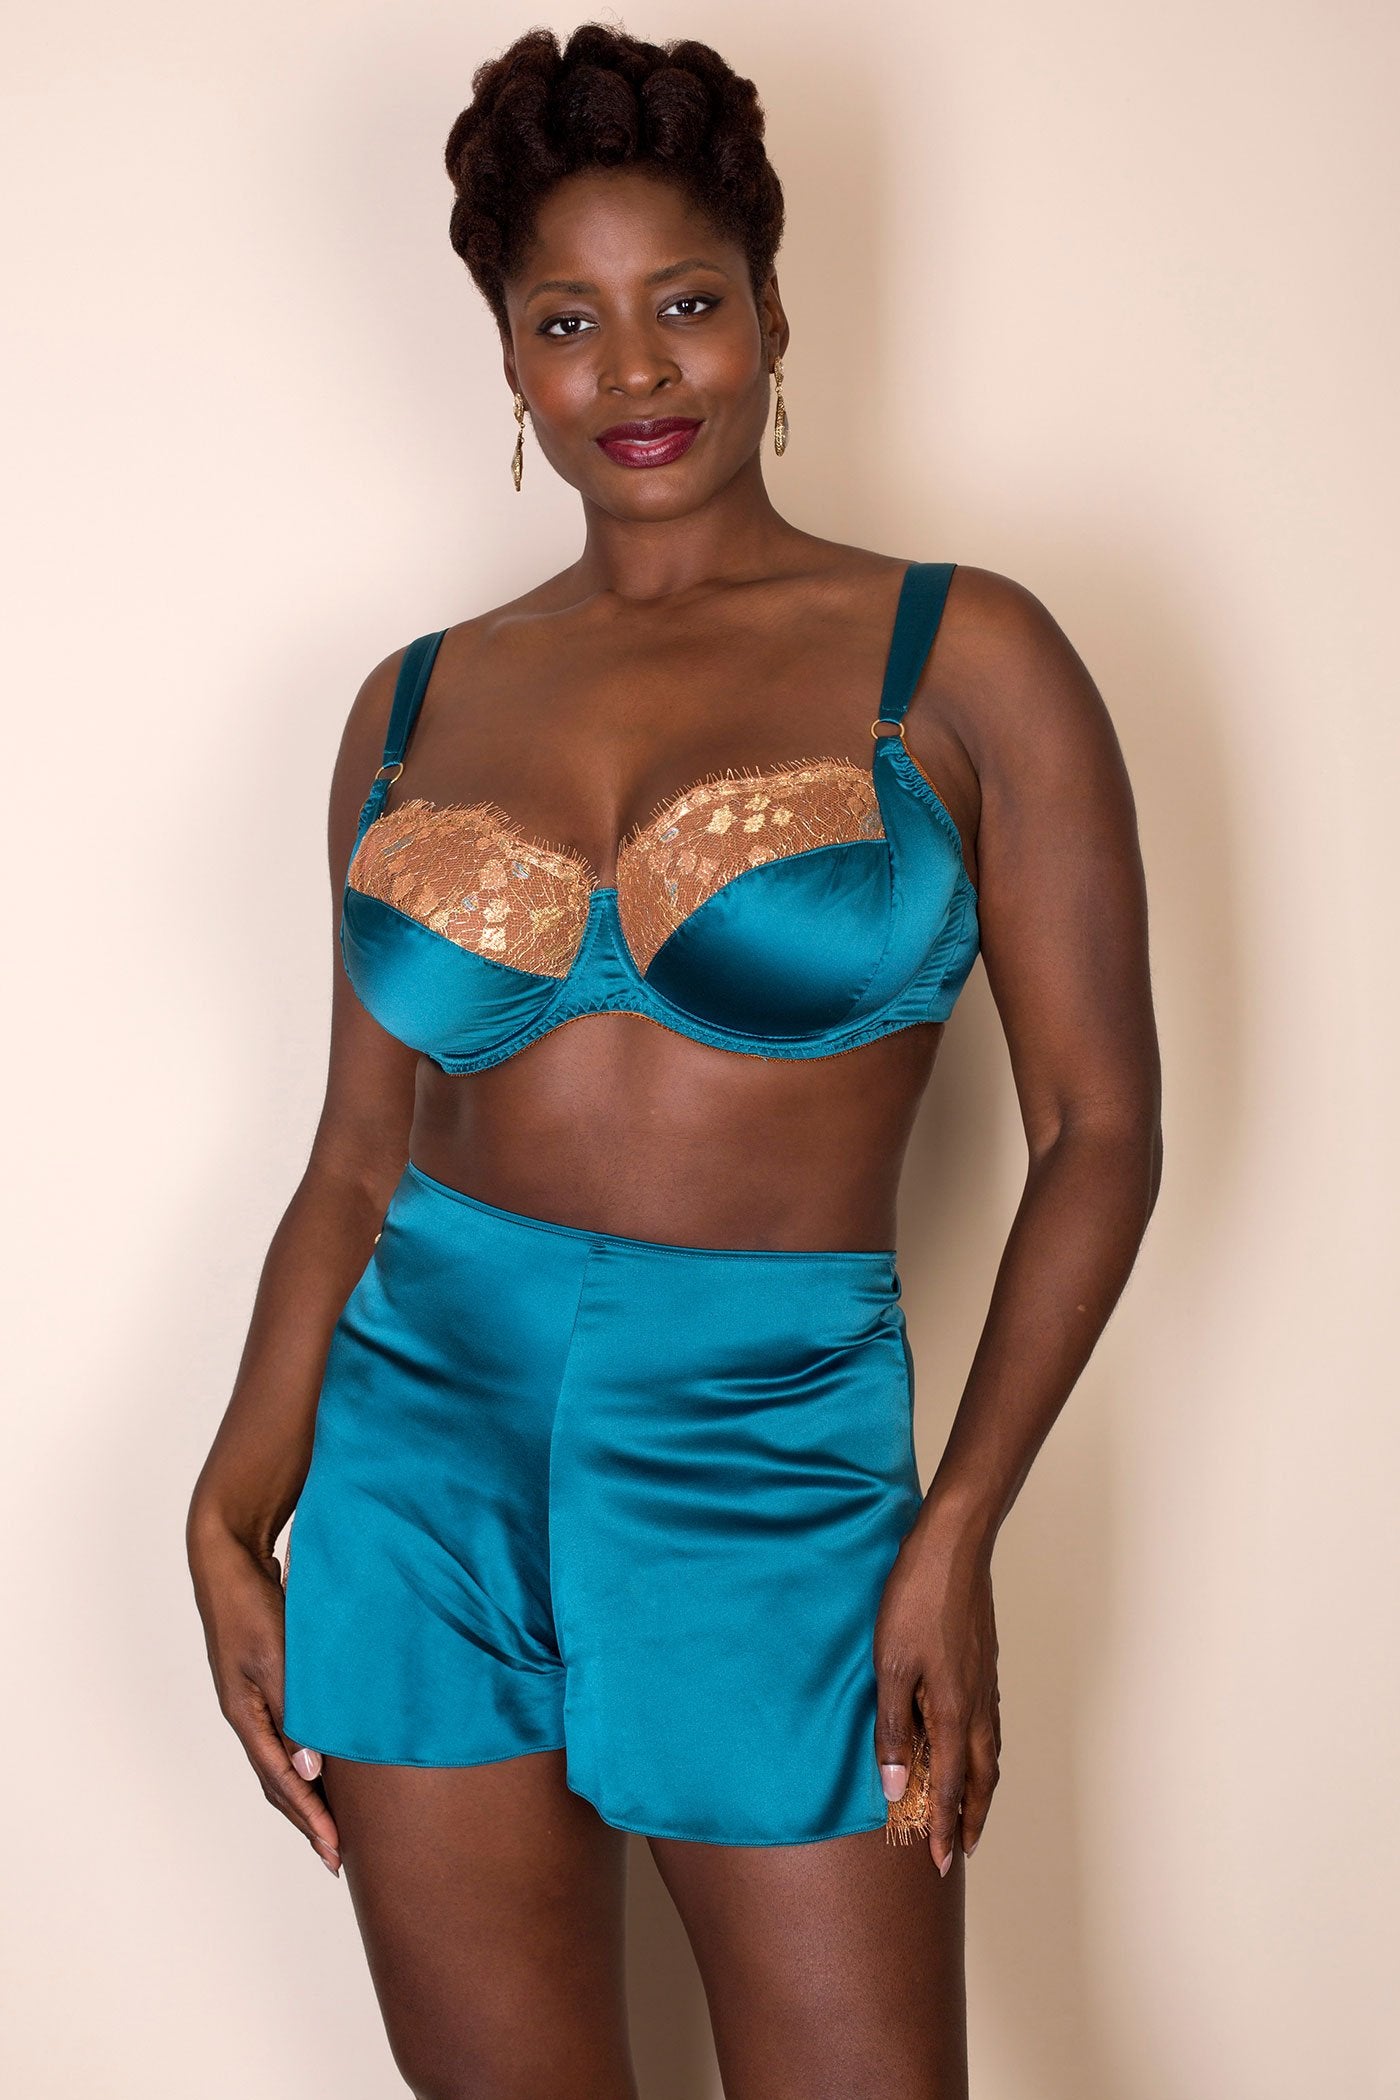 Silk French knickers in bright blue silk with matching DD+ cup size bra with gold lace